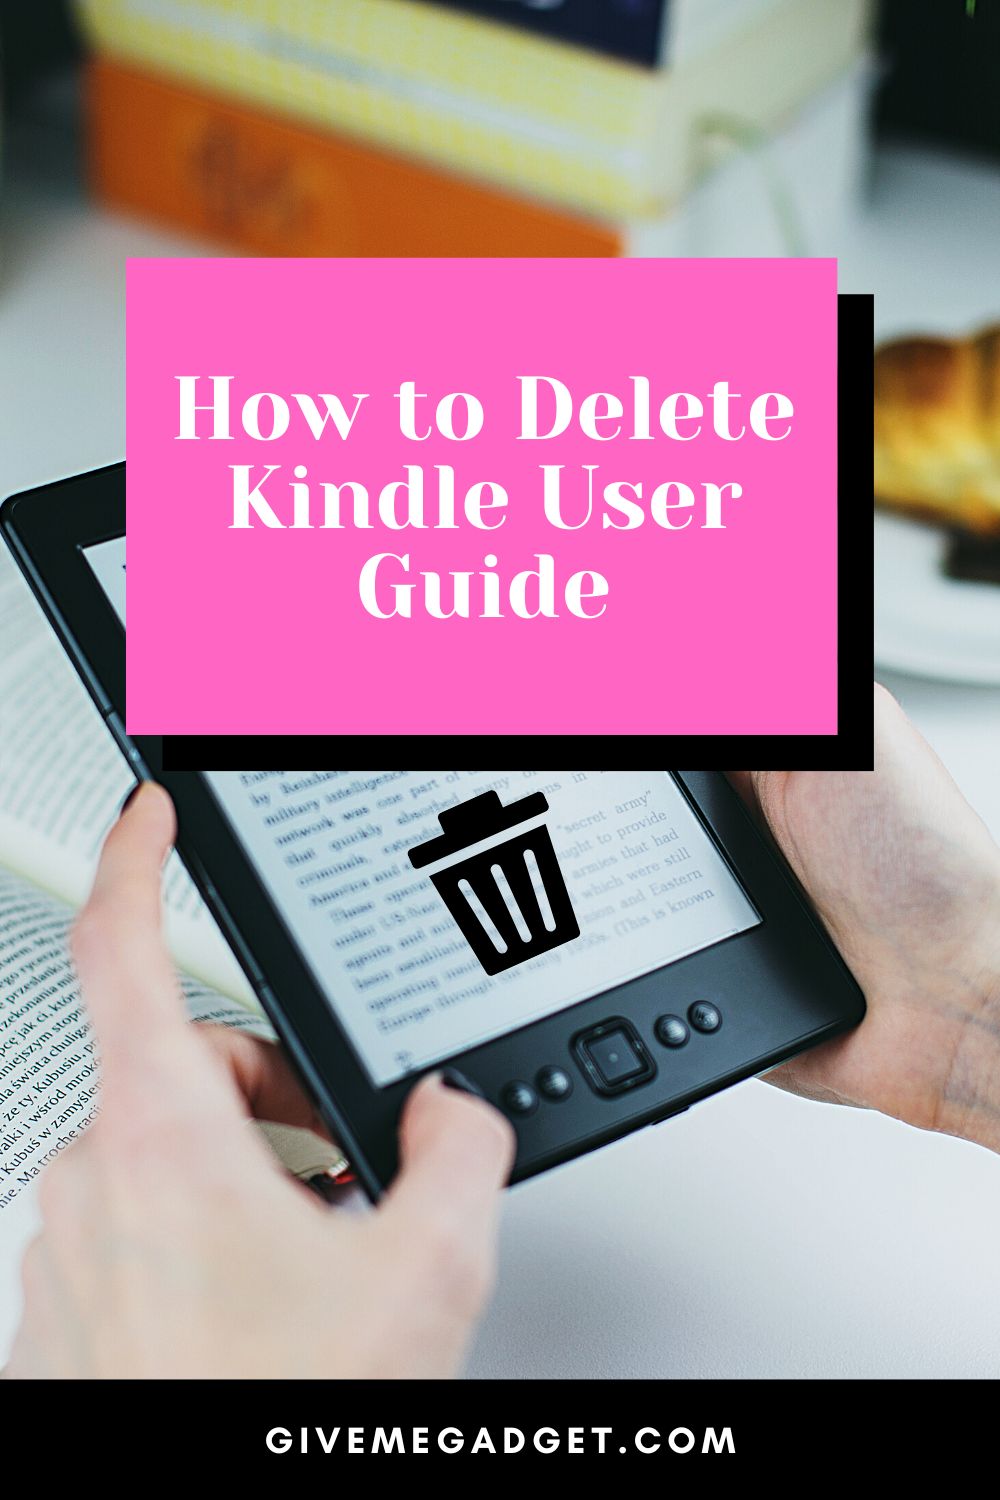 How to Delete Kindle User Guide